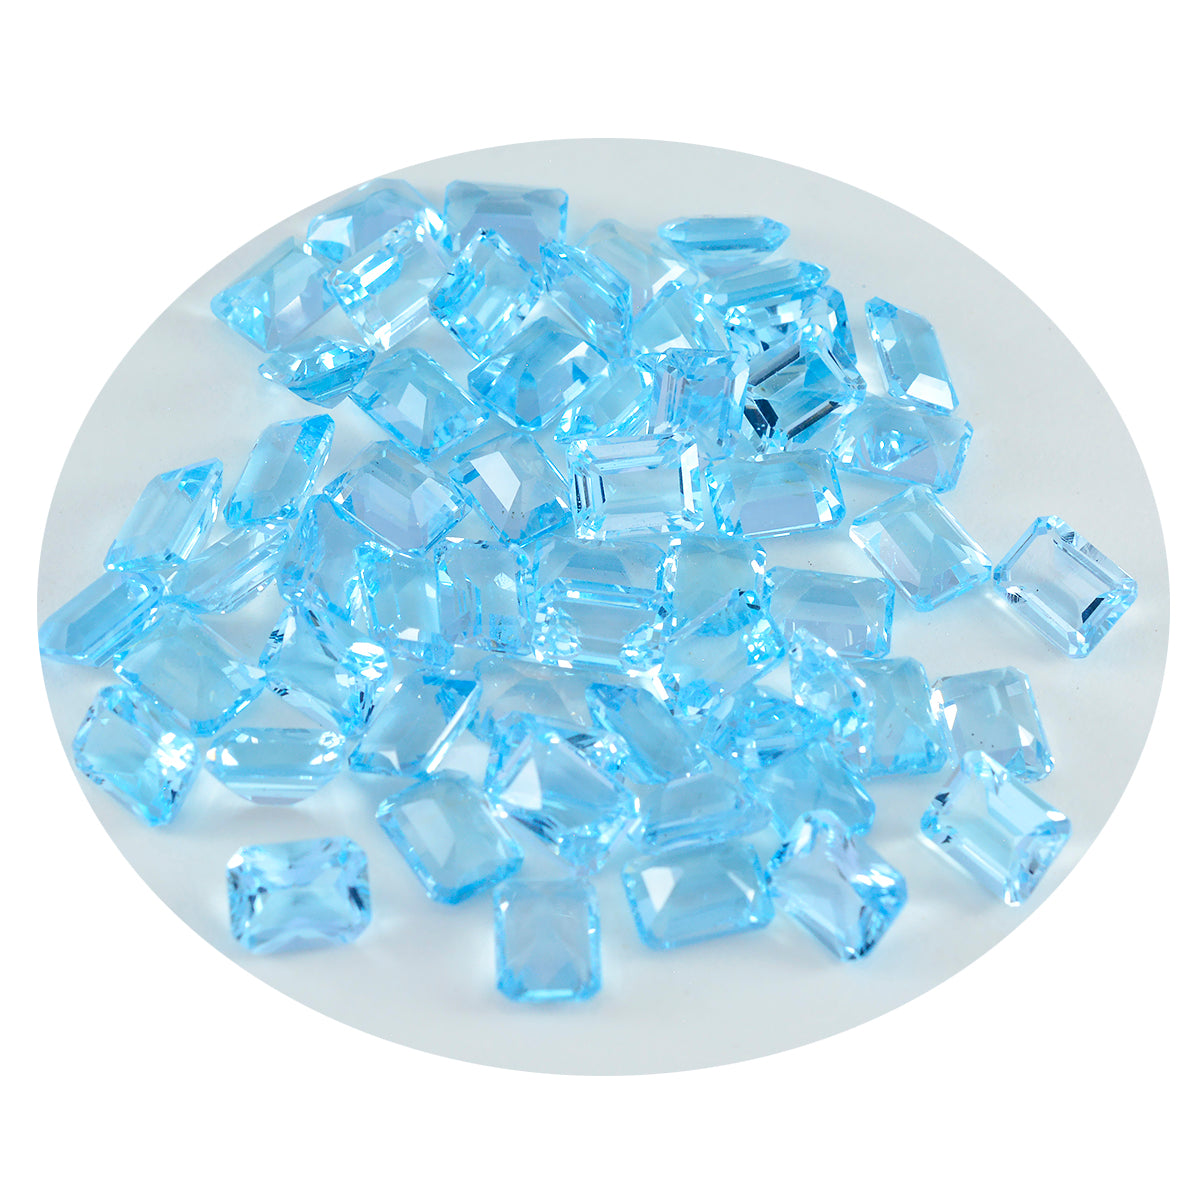 Riyogems 1PC Real Blue Topaz Faceted 3x5 mm Octagon Shape A1 Quality Loose Stone